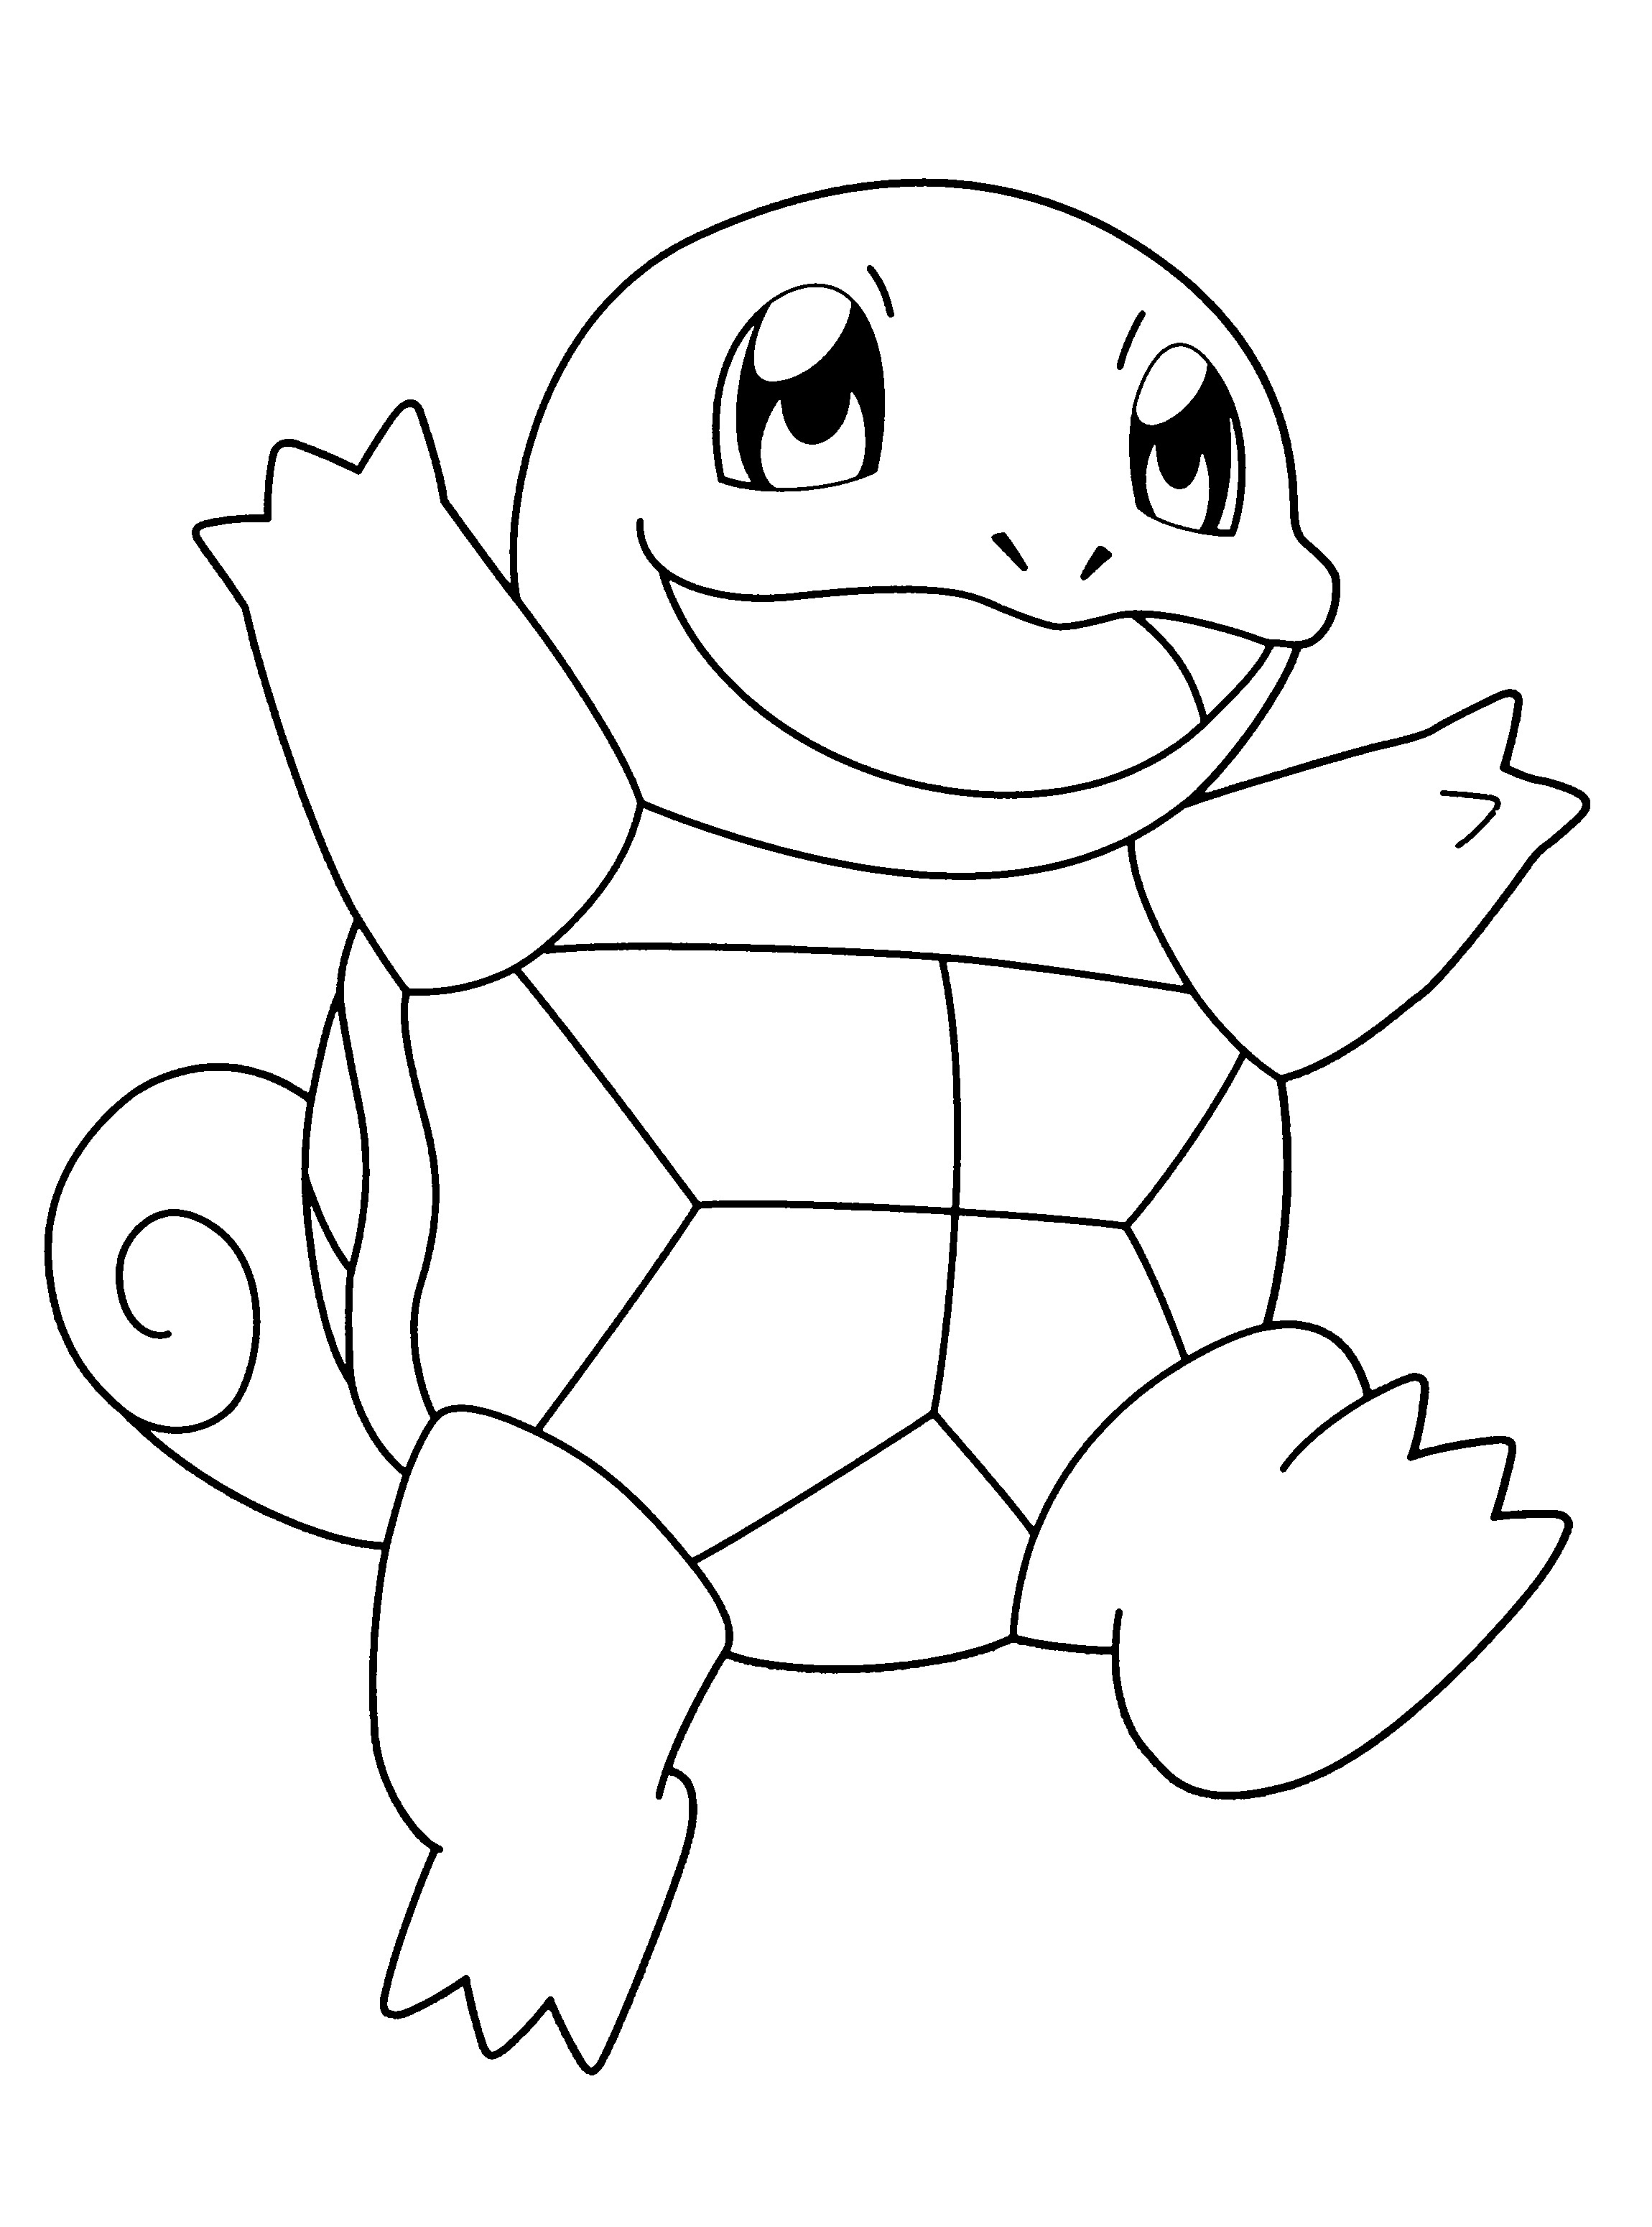 Coloring Pages For Big Boys
 Pikachu and Pokemon coloring pages Coloring Pages BIG BANG